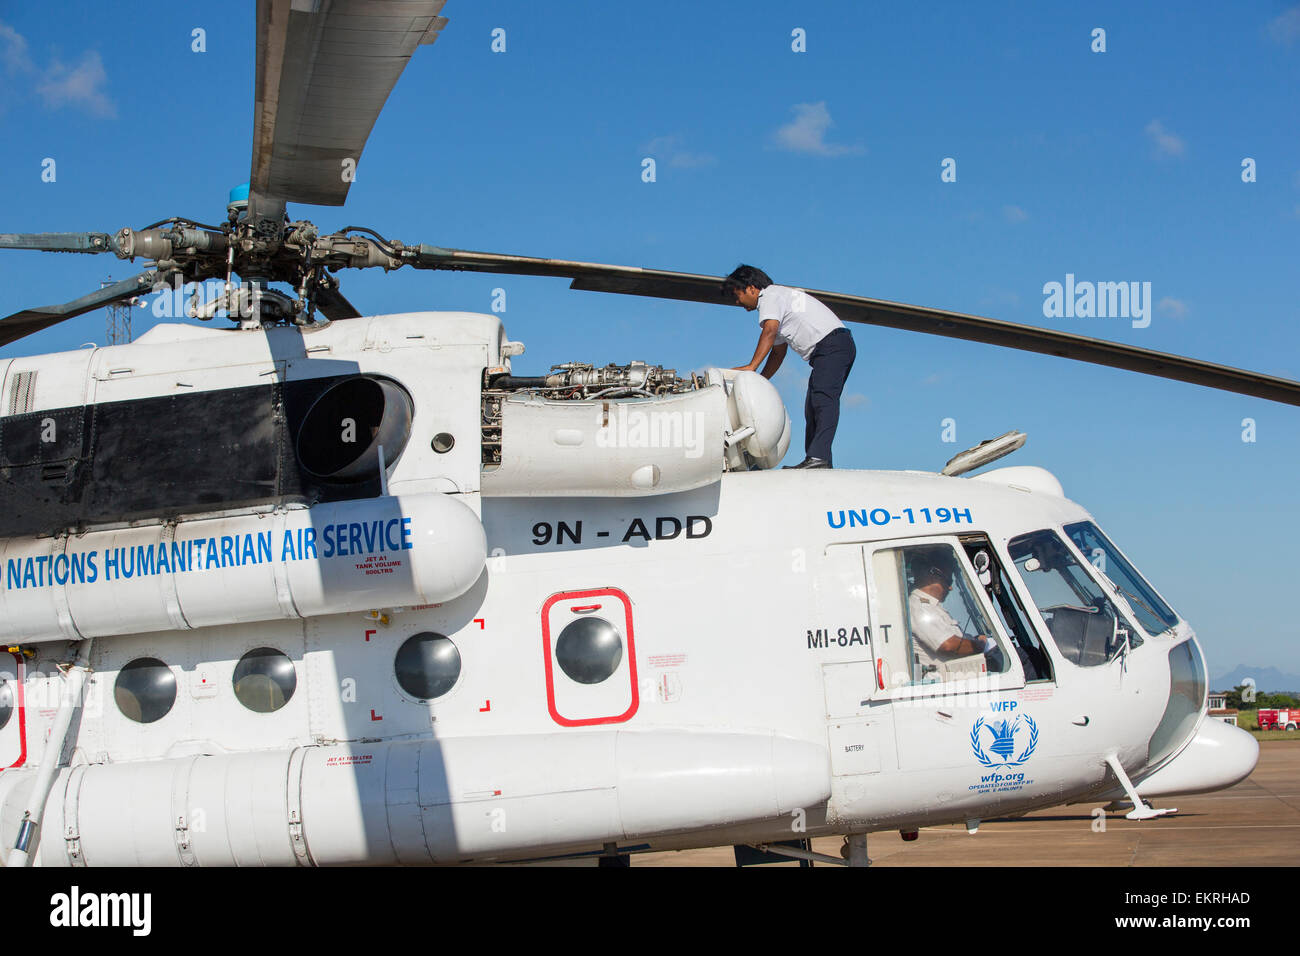 In mid January 2015, a three day period of excessive rain brought unprecedented floods to the small poor African country of Malawi. It displaced nearly quarter of a million people, devastated 64,000 hectares of land, and killed several hundred people. This shot shows A Russian Mi8 helicopter being used by the United Nations, World Food Program to deliver food aid to areas still cut off by the flooding, around Bangula and Mkhanga. Stock Photo